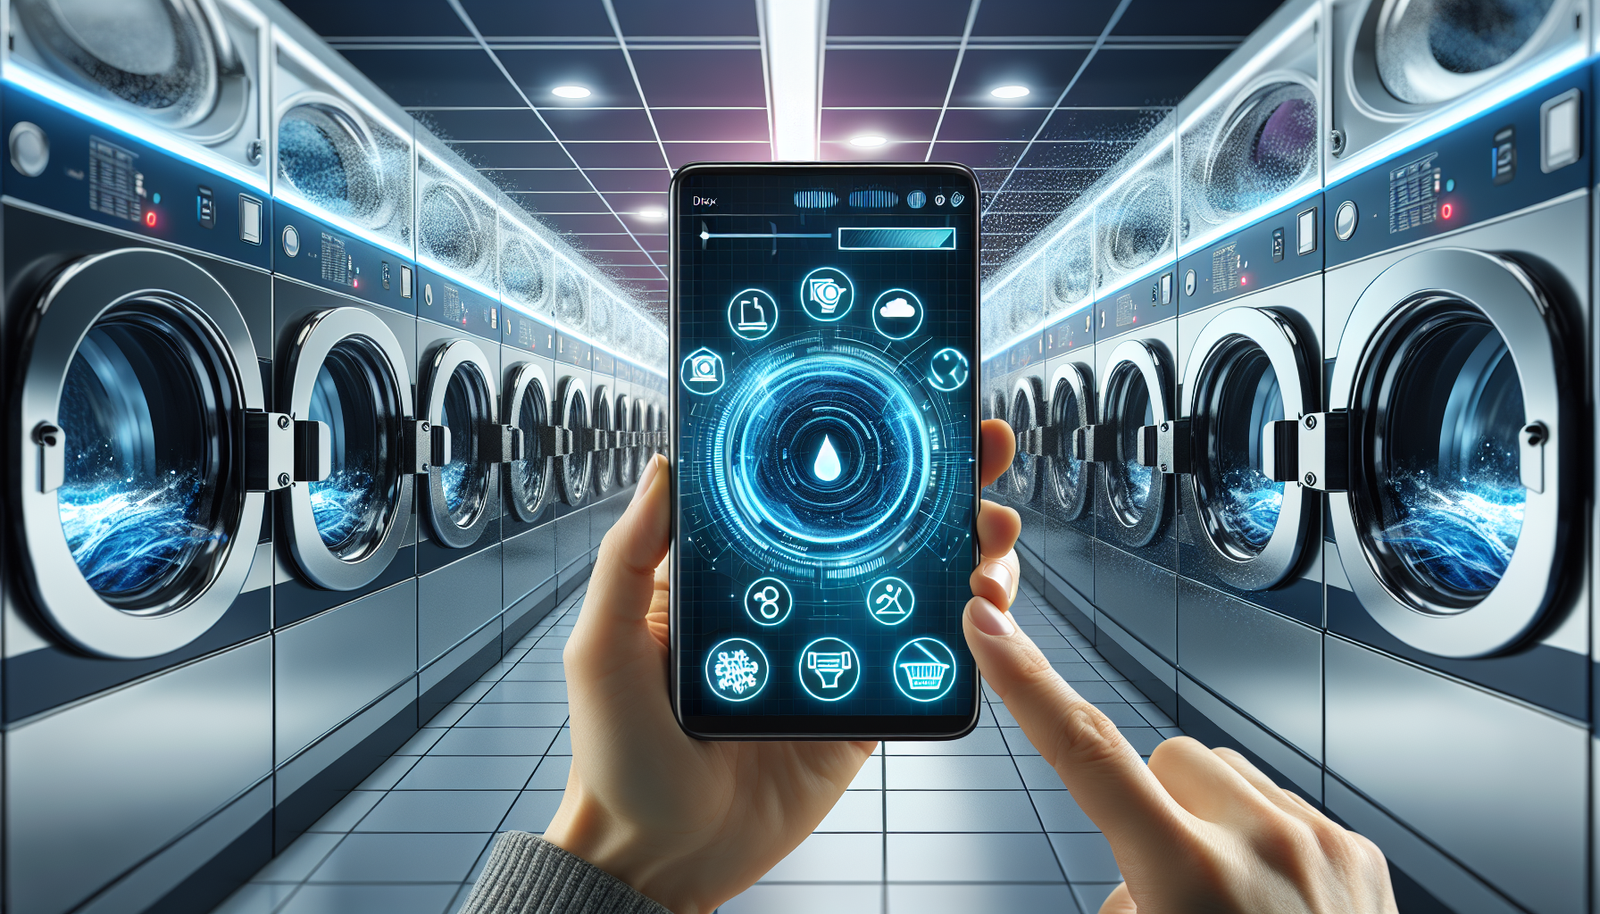 Illustration of a customer using a mobile app to operate laundry machines